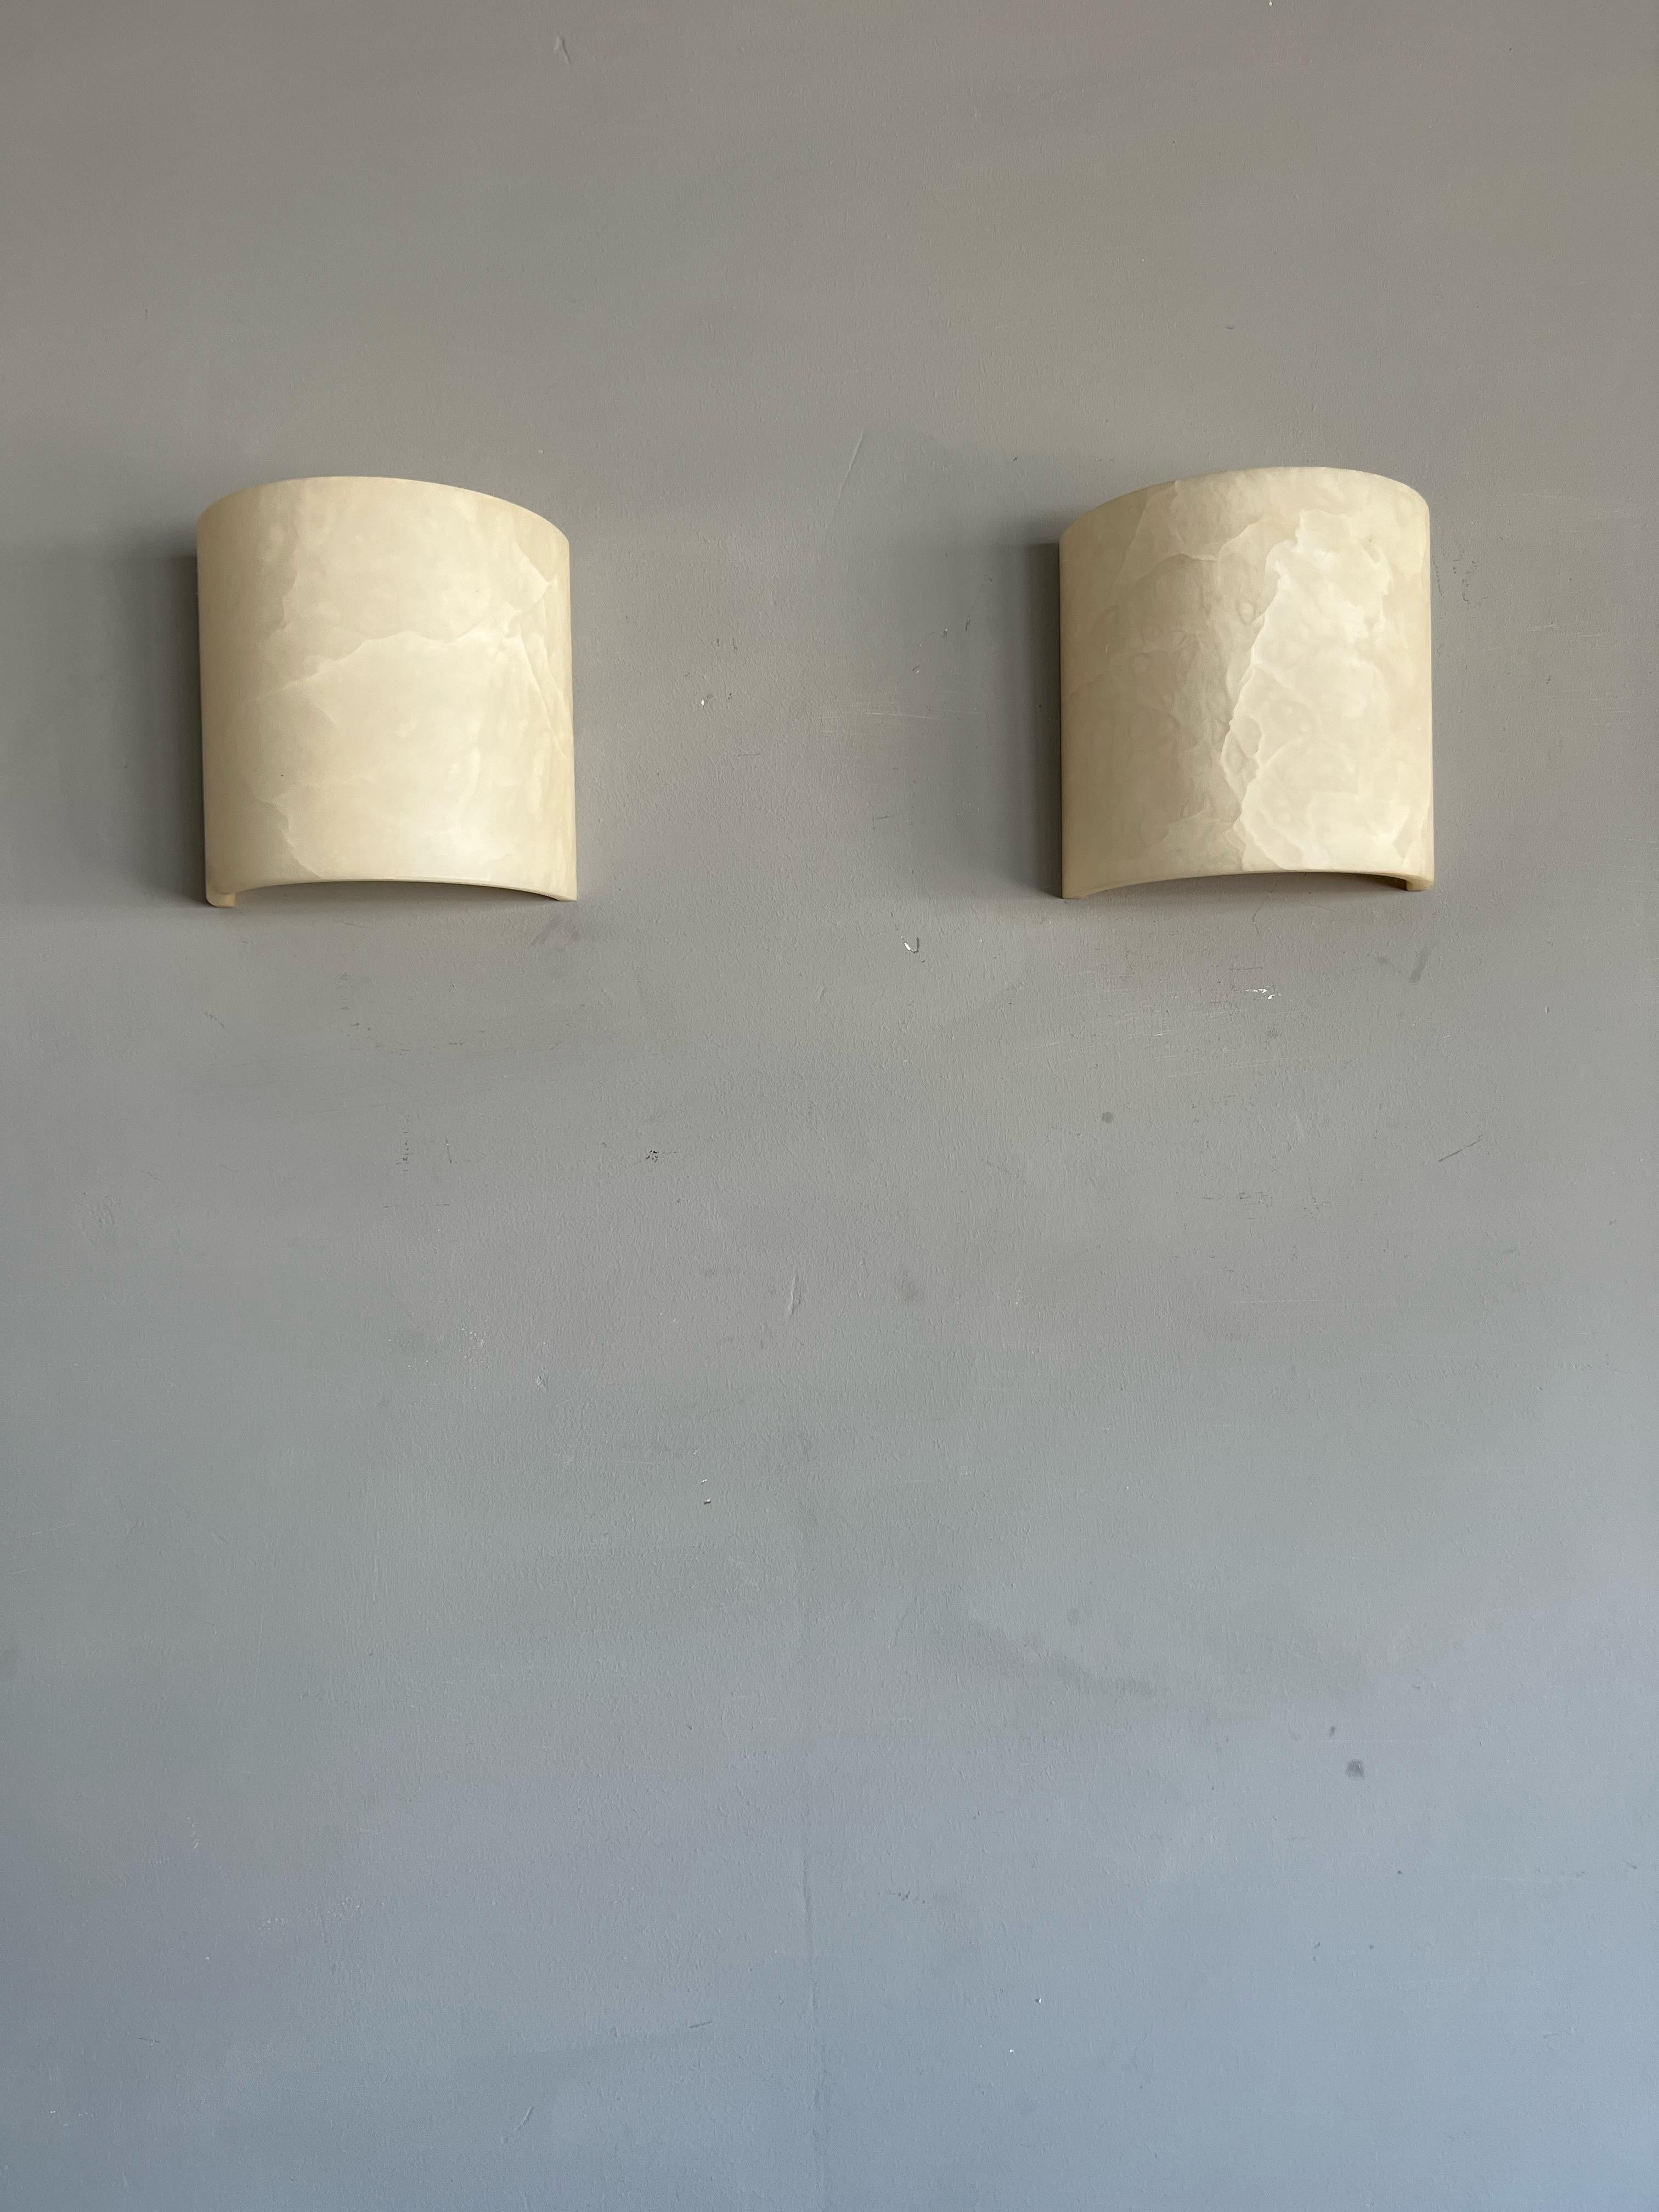 Italian Great Pair of Art Deco Style Alabaster Up & Down Light Wall Sconces / Fixtures